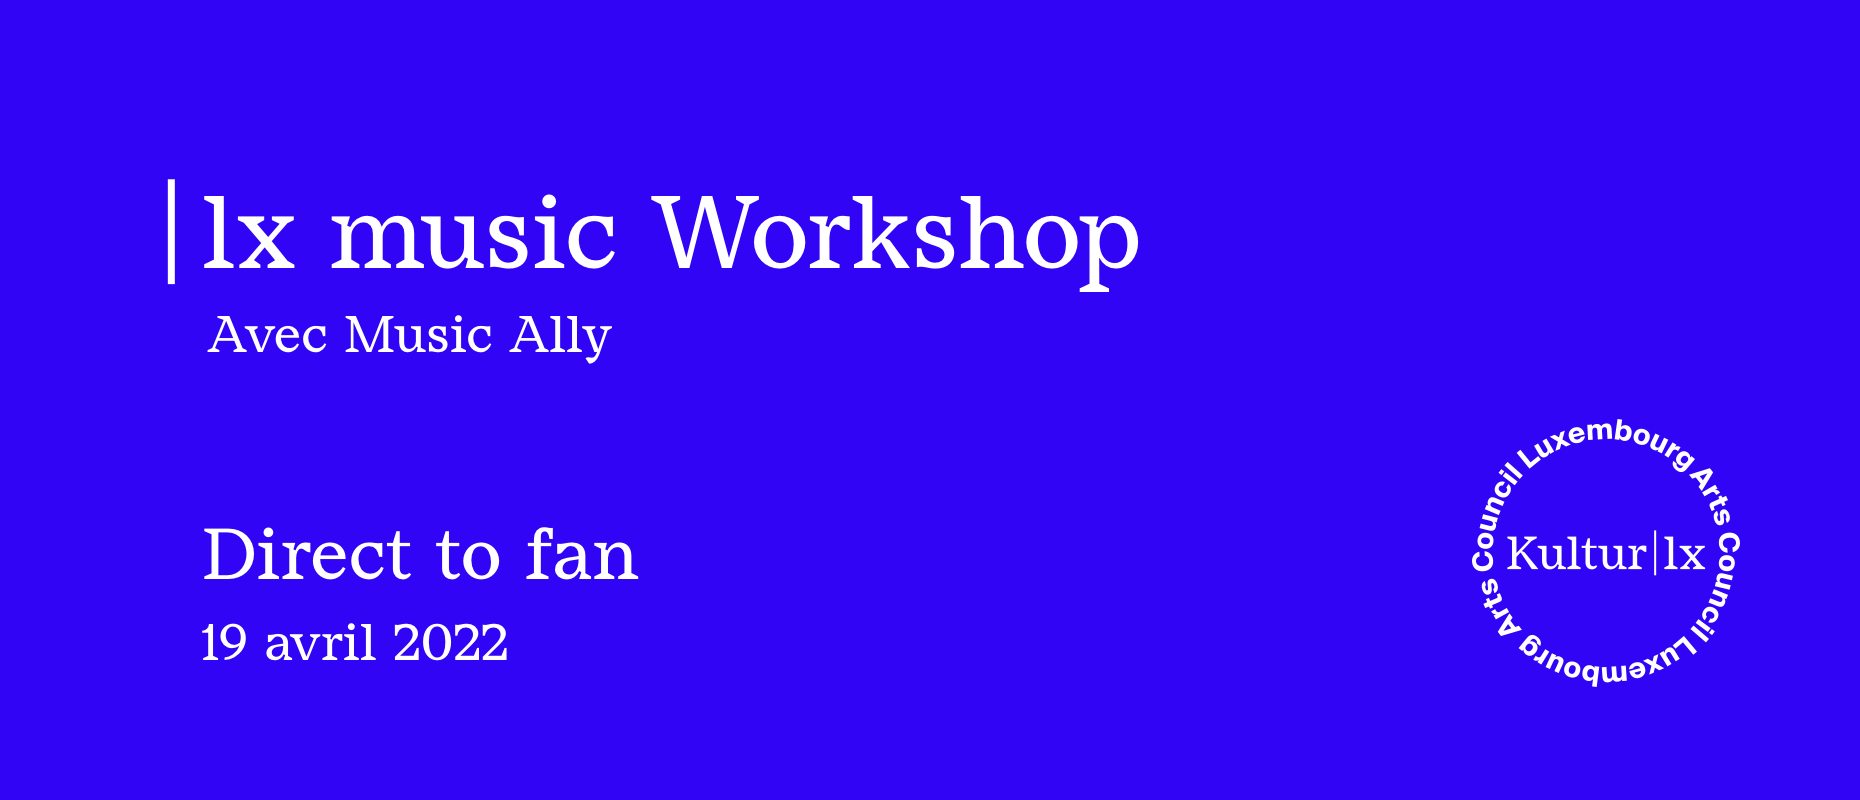 |lx music workshop - Direct to fan avec Music Ally